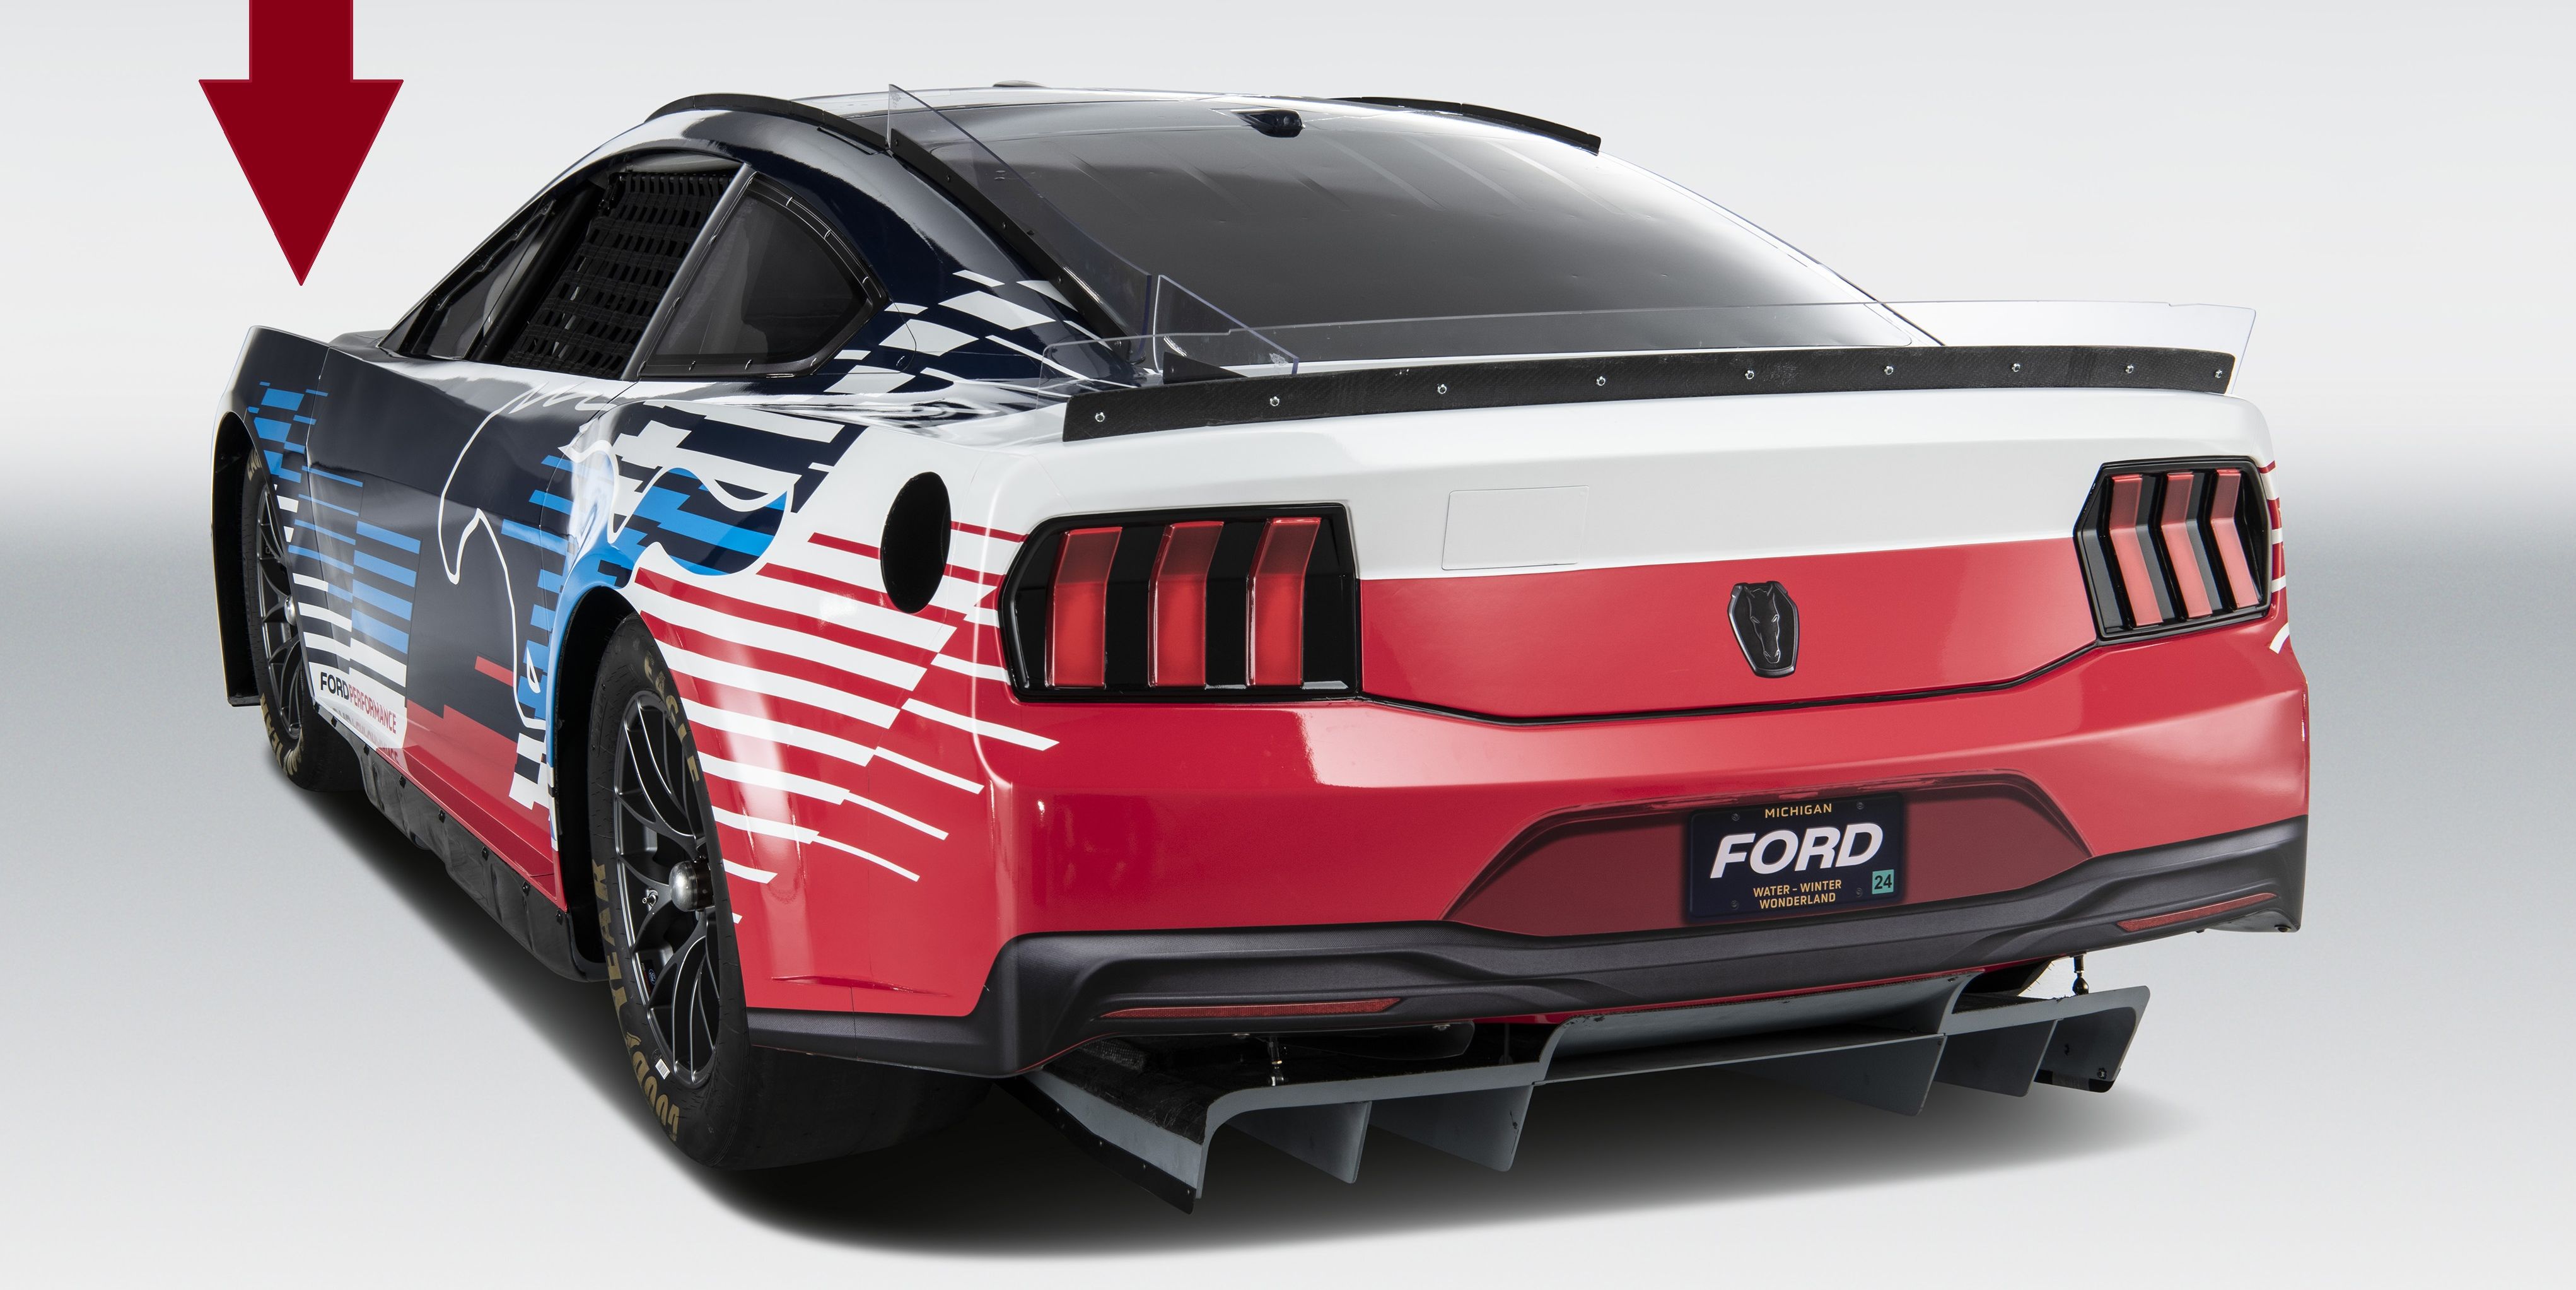 The New NASCAR Mustang Cup Car Has a Radical Bodywork Change